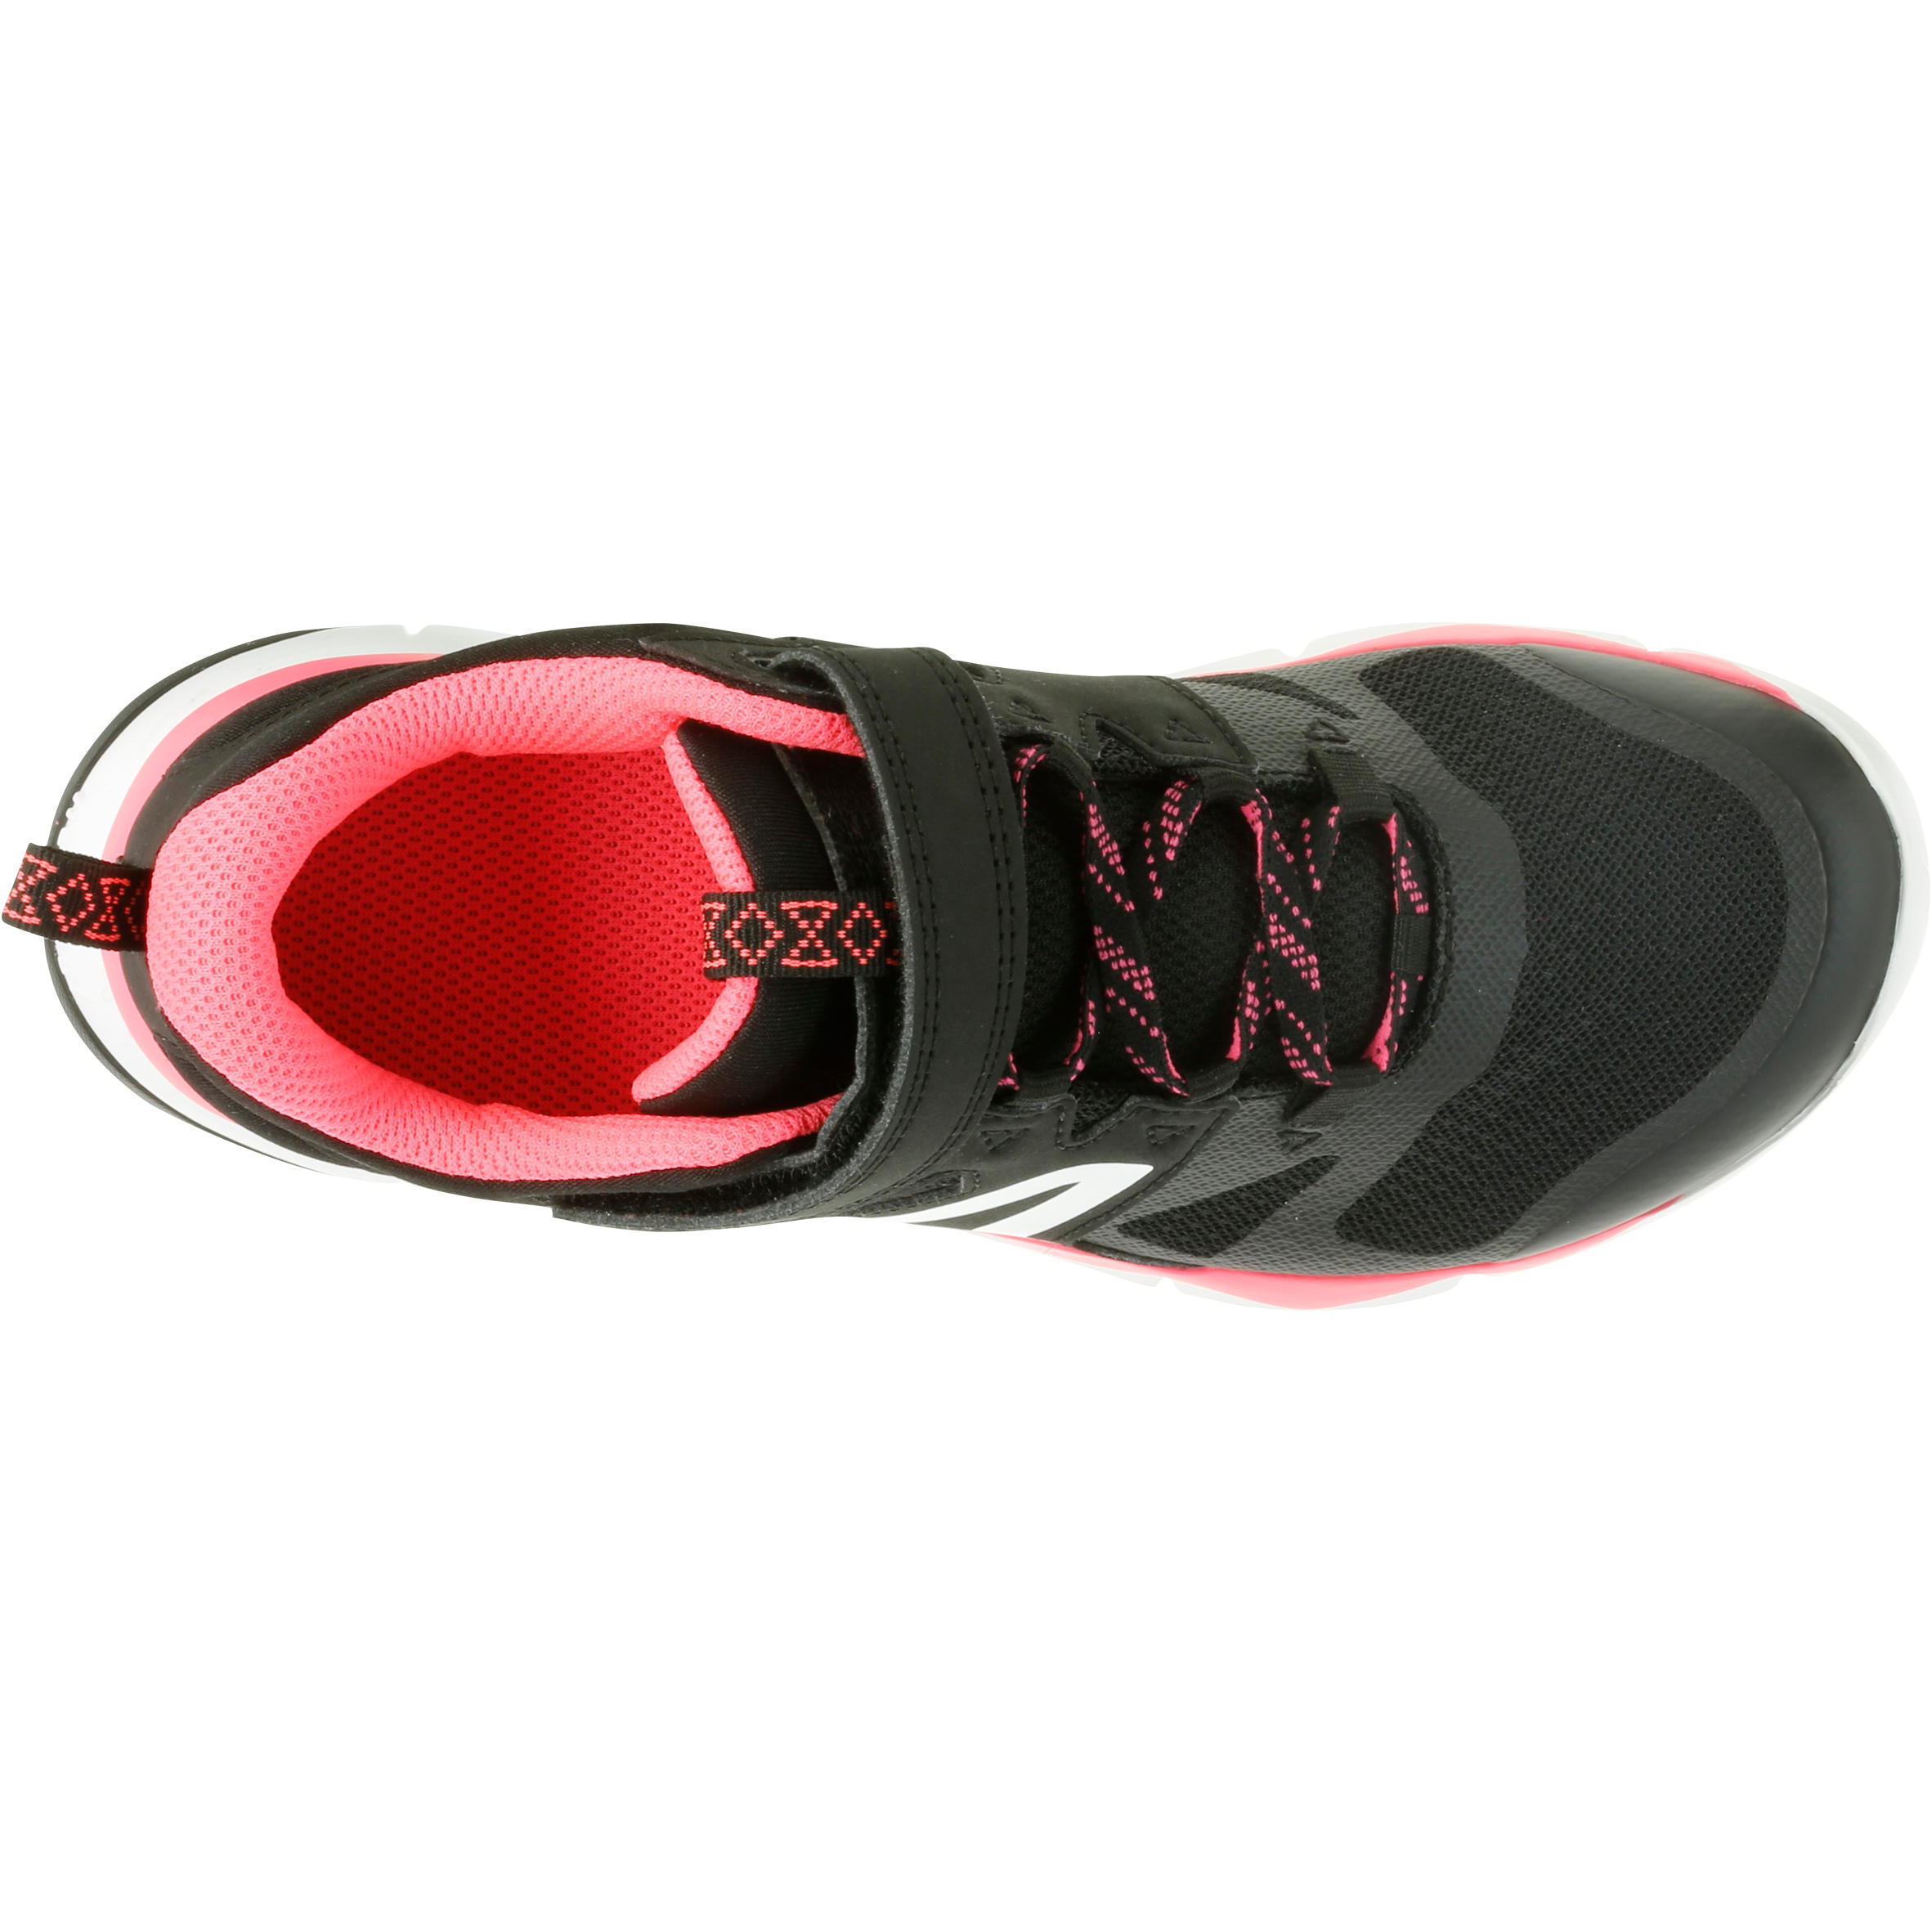 Kids' lightweight and breathable rip-tab trainers, black/pink 9/12